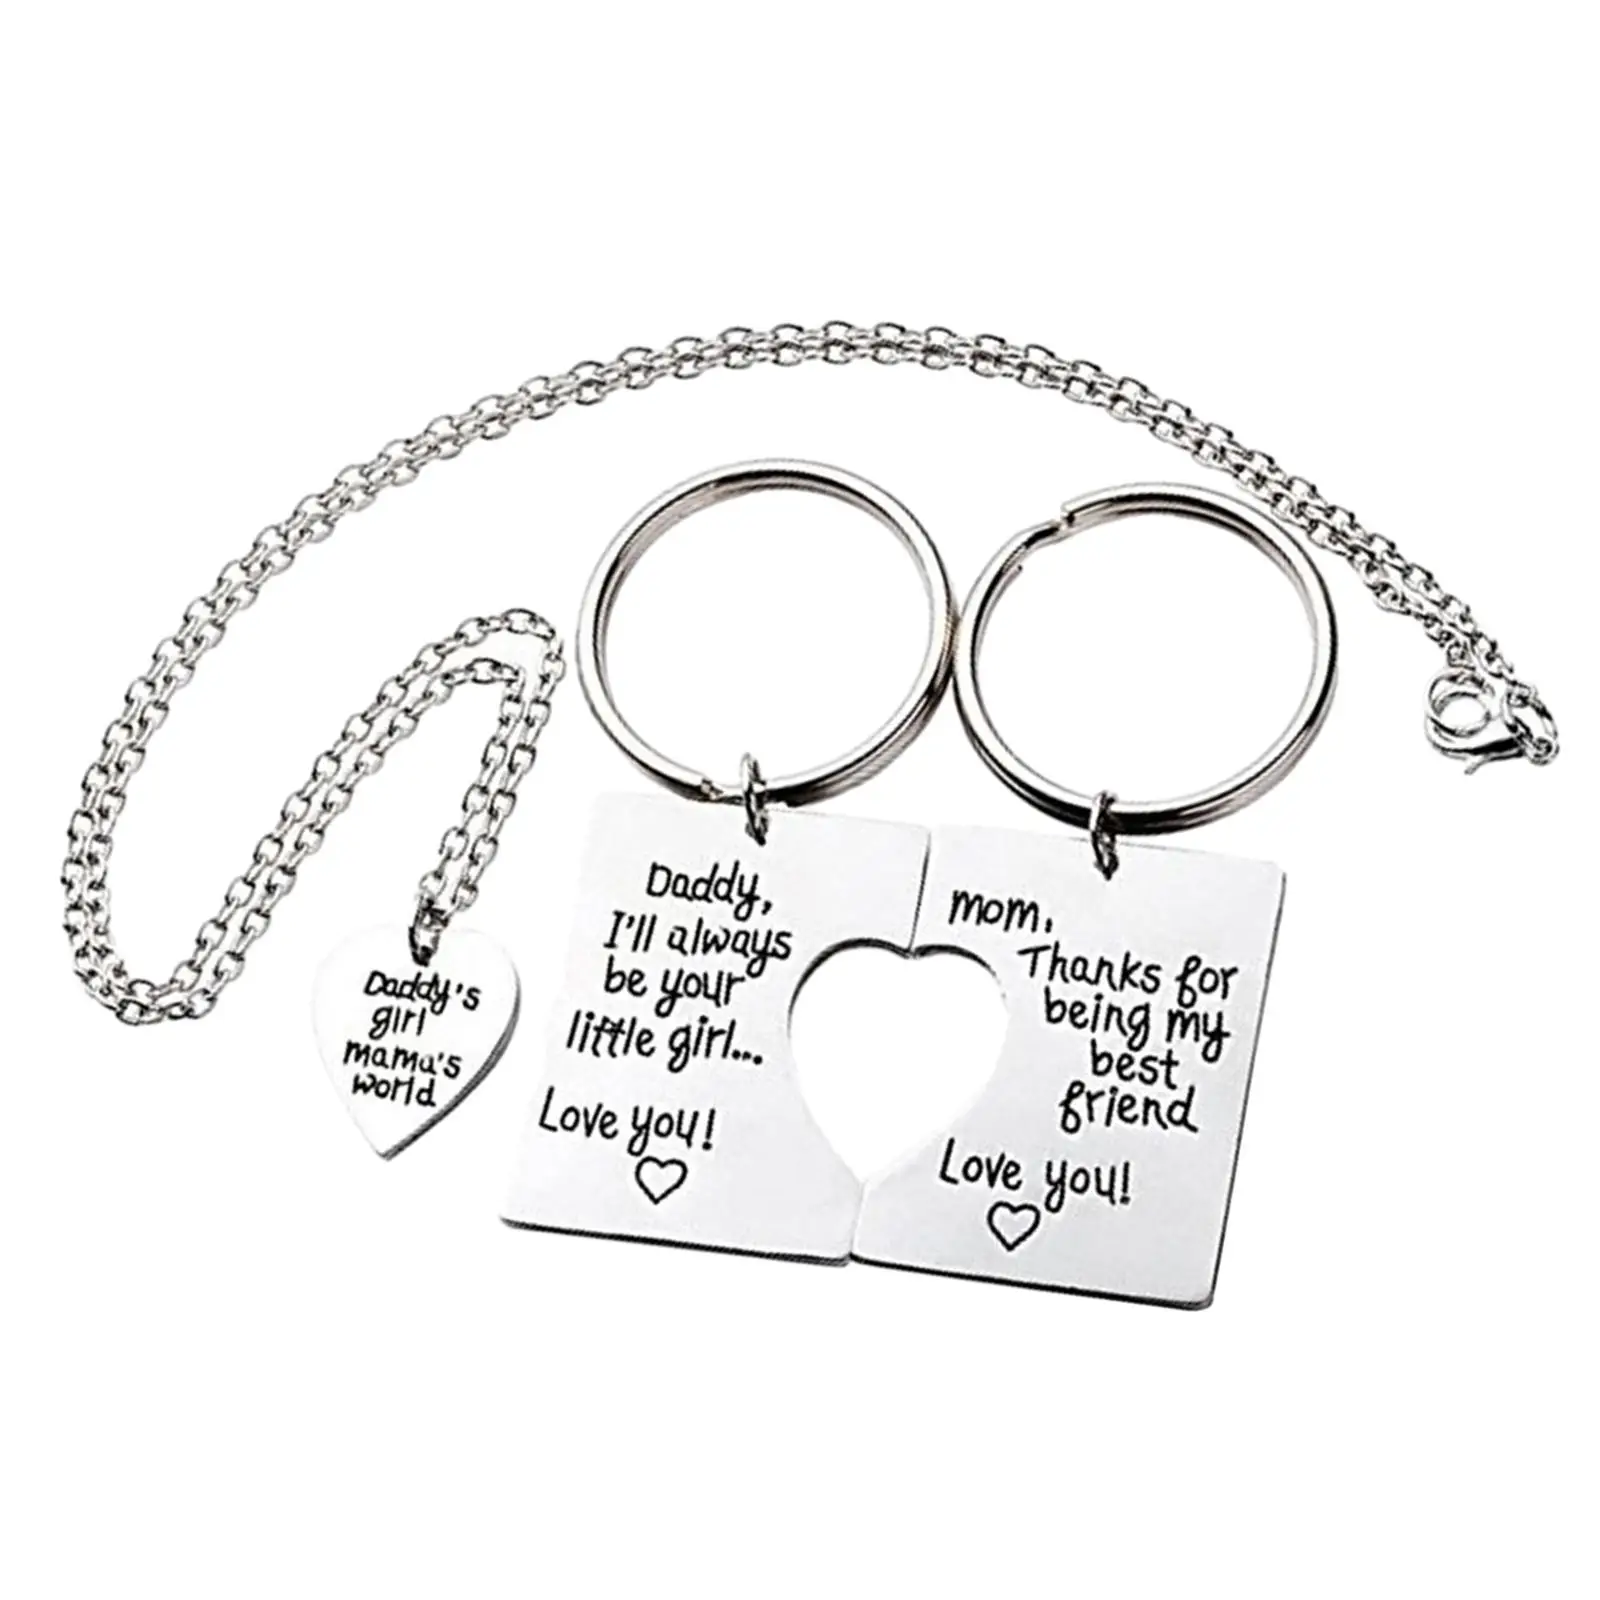 Daddy`s Girl Mama`s World New Year Thanksgiving Gifts for Her Trendy Family Jewelry Gifts for Daughter Father Son Daddy Mother